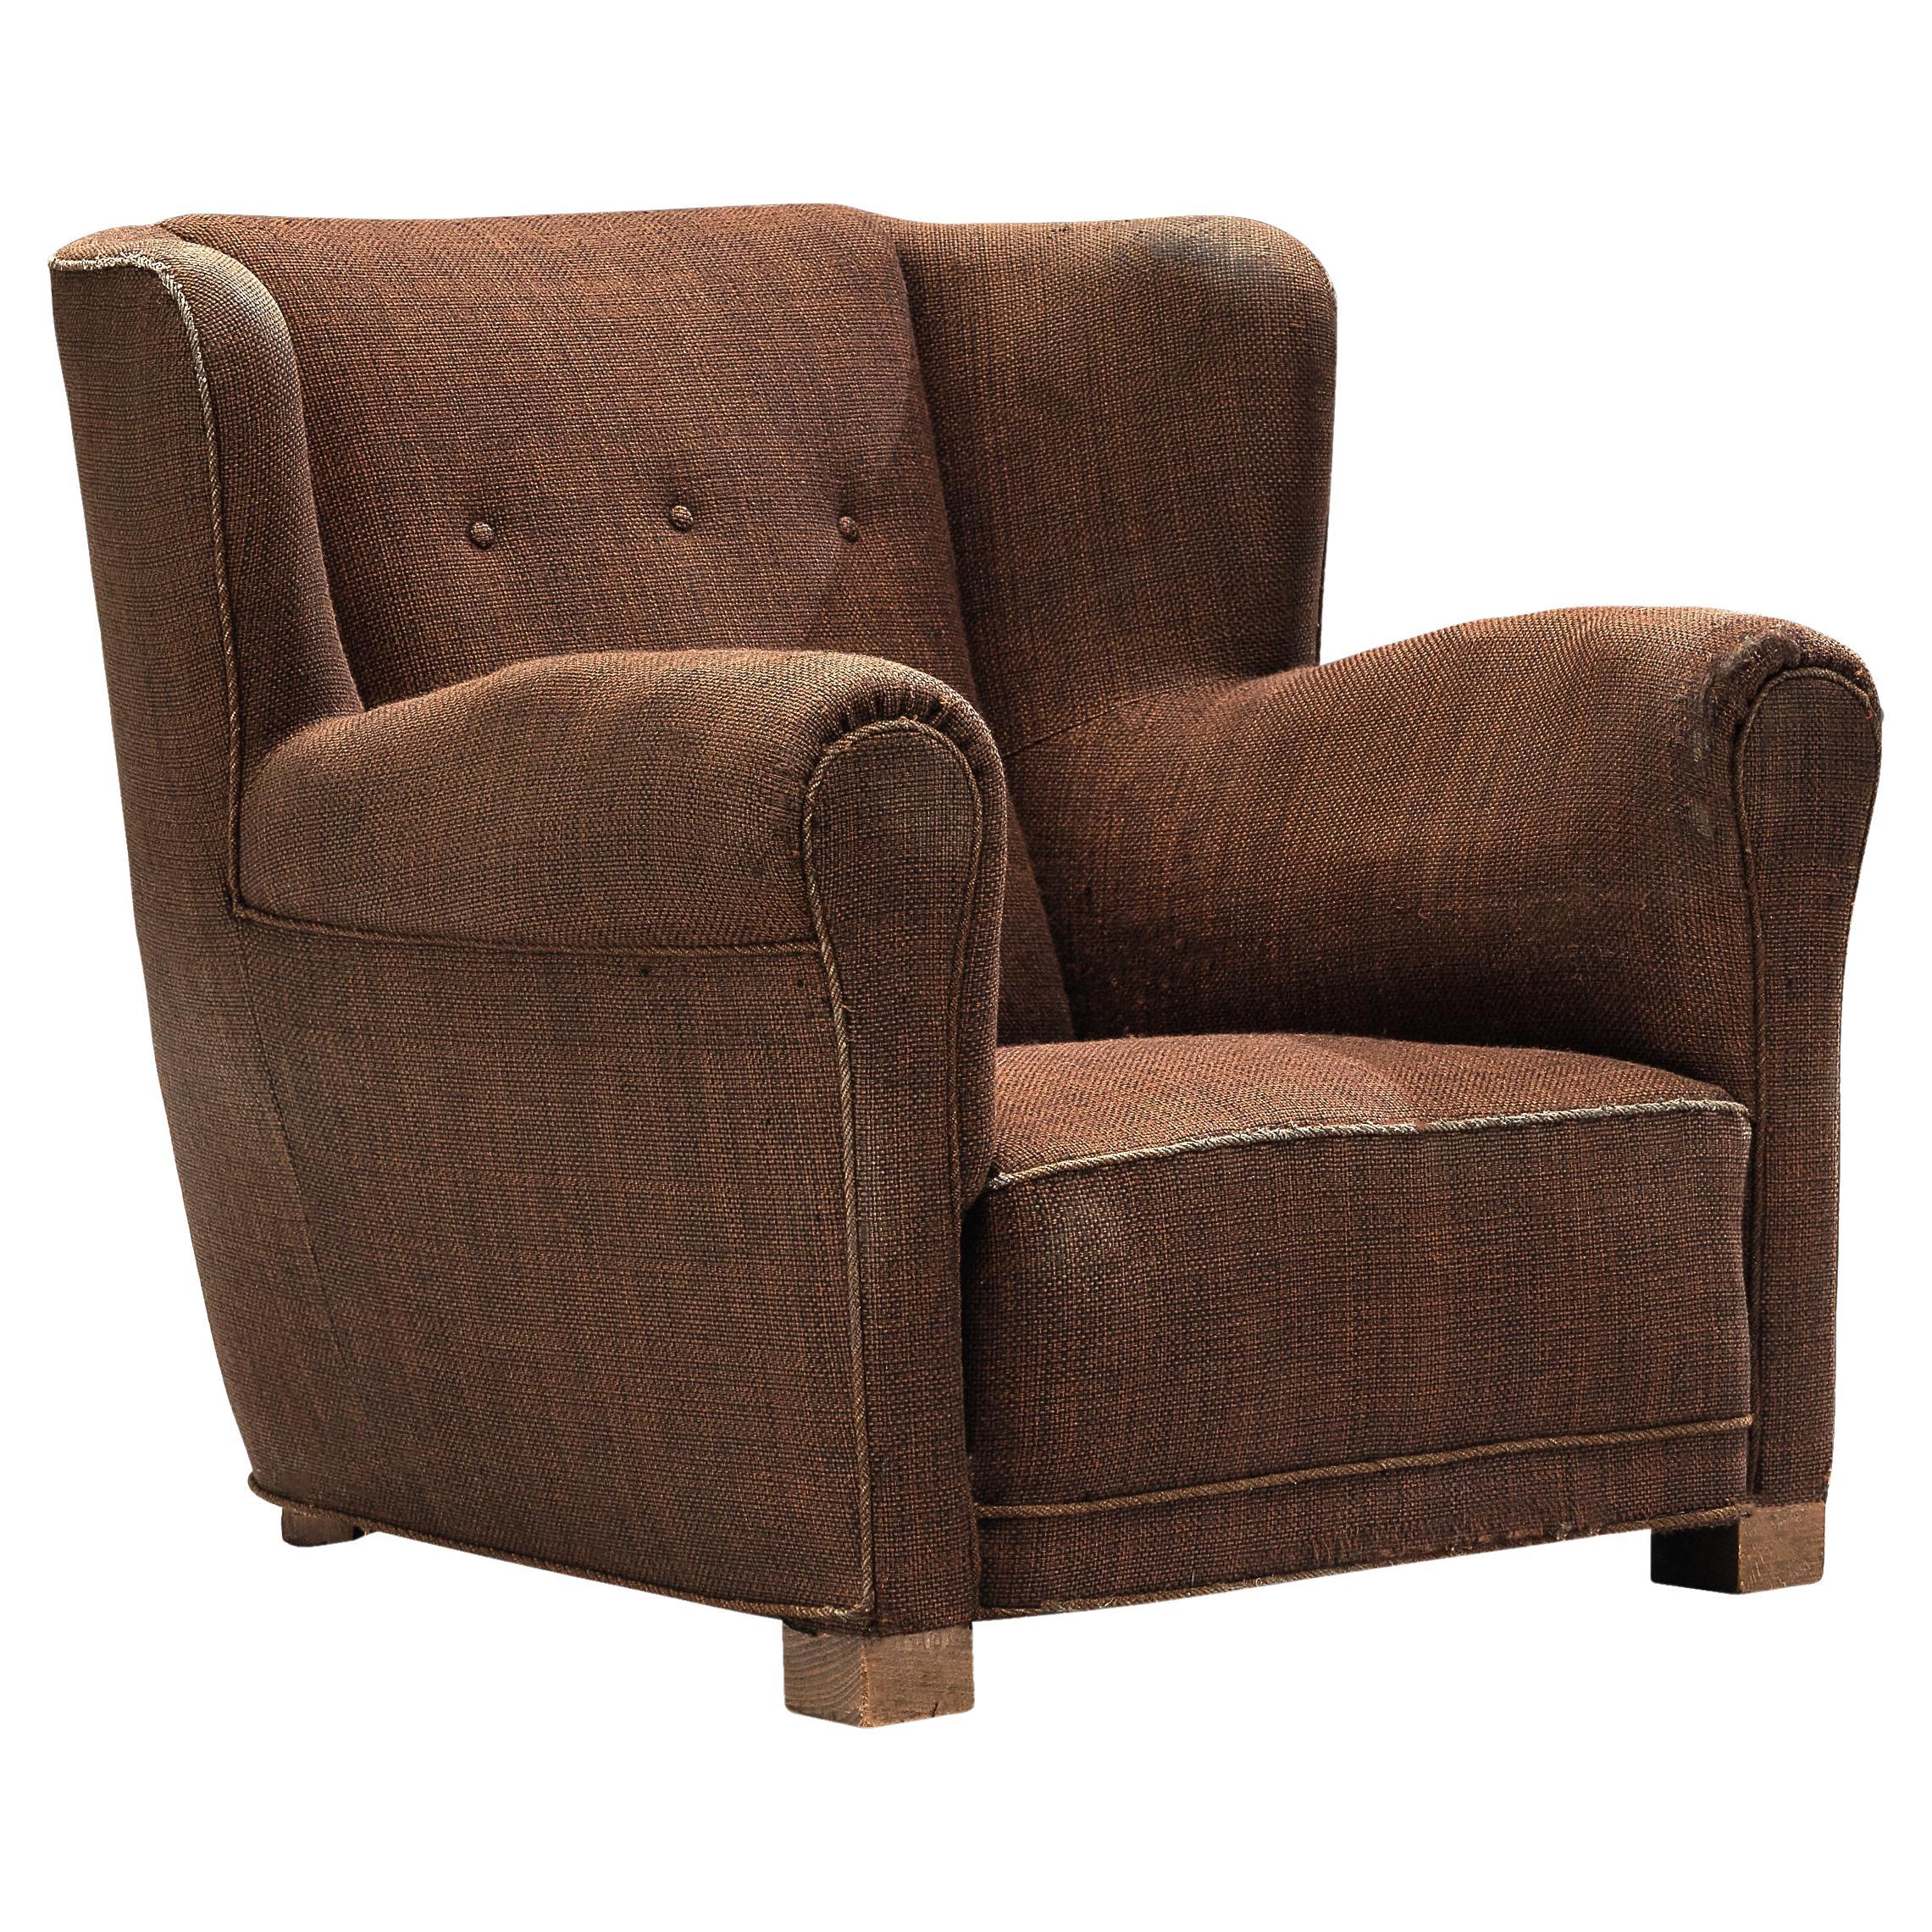 Bulky Danish Lounge Chair in Dark Brown Upholstery For Sale